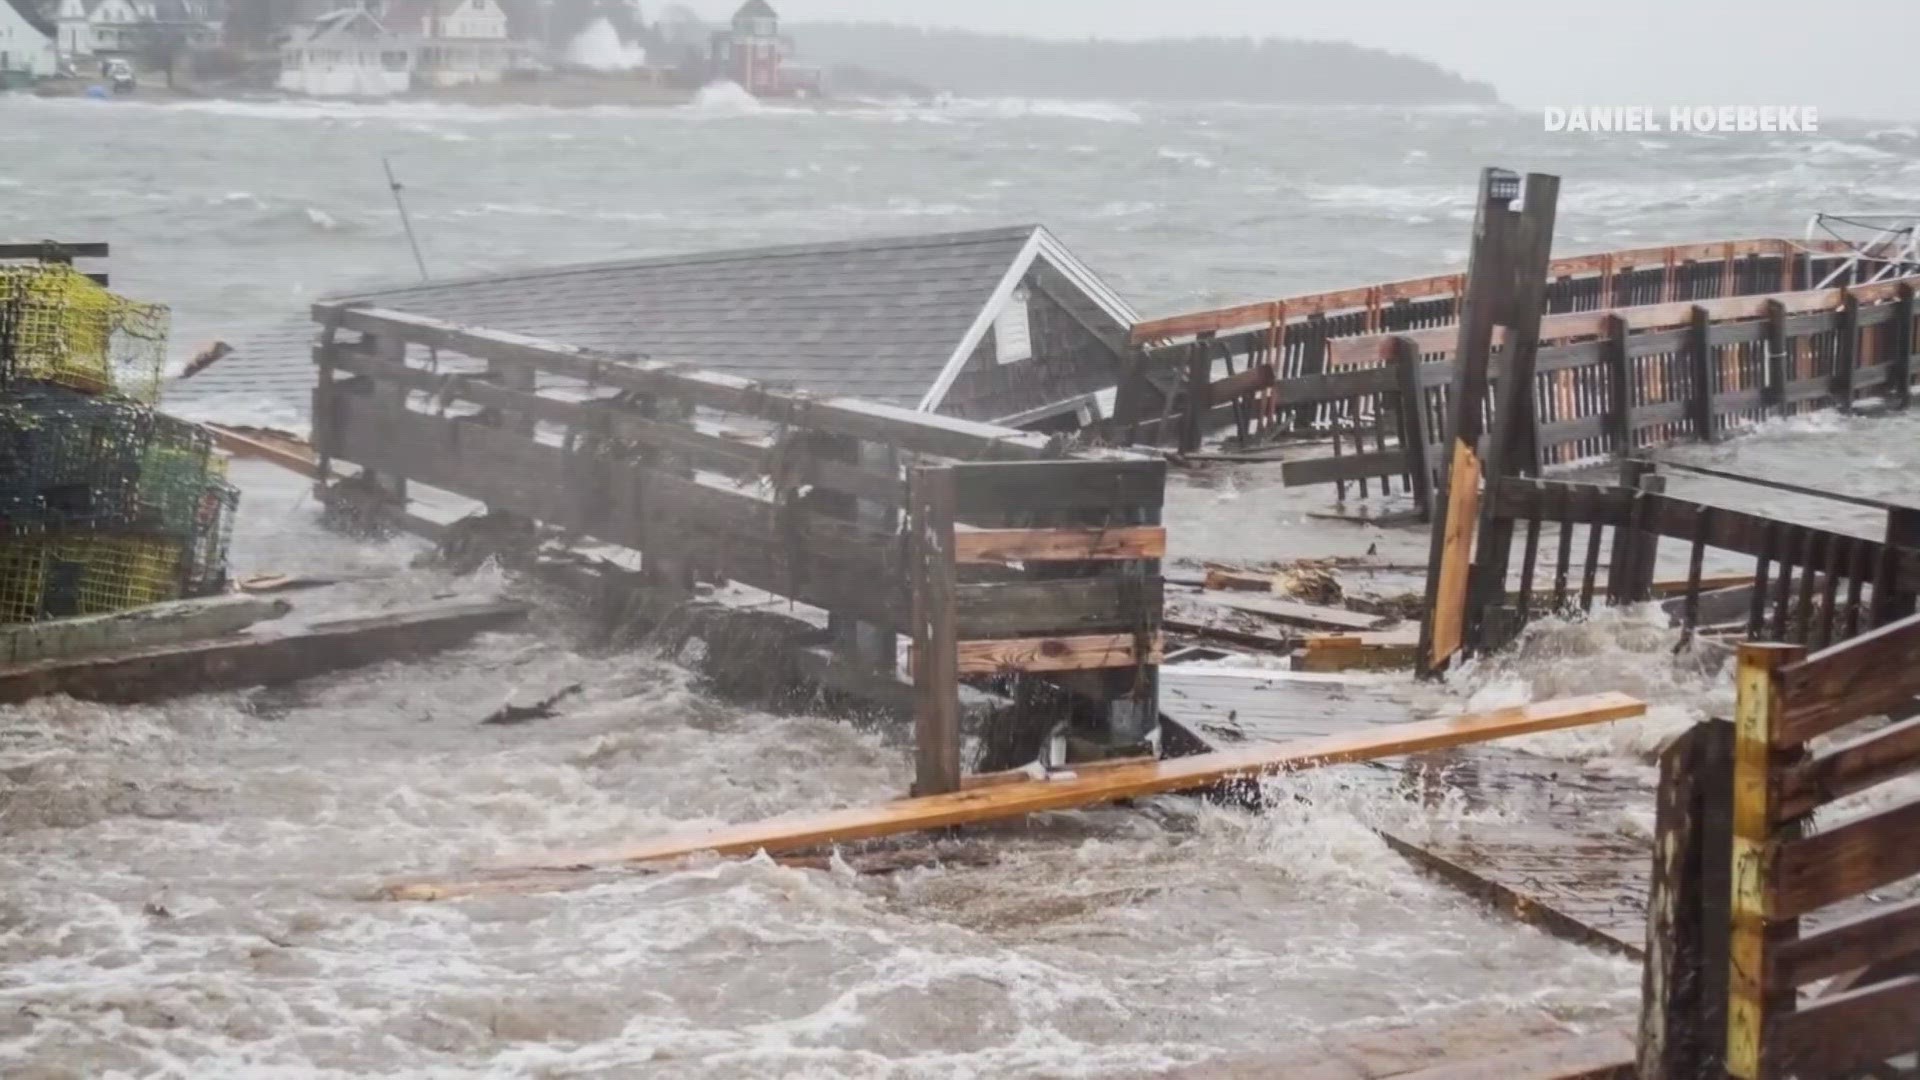 After severe storms tore through working waterfronts, many Mainers have been watching the bill that could help with repairs.